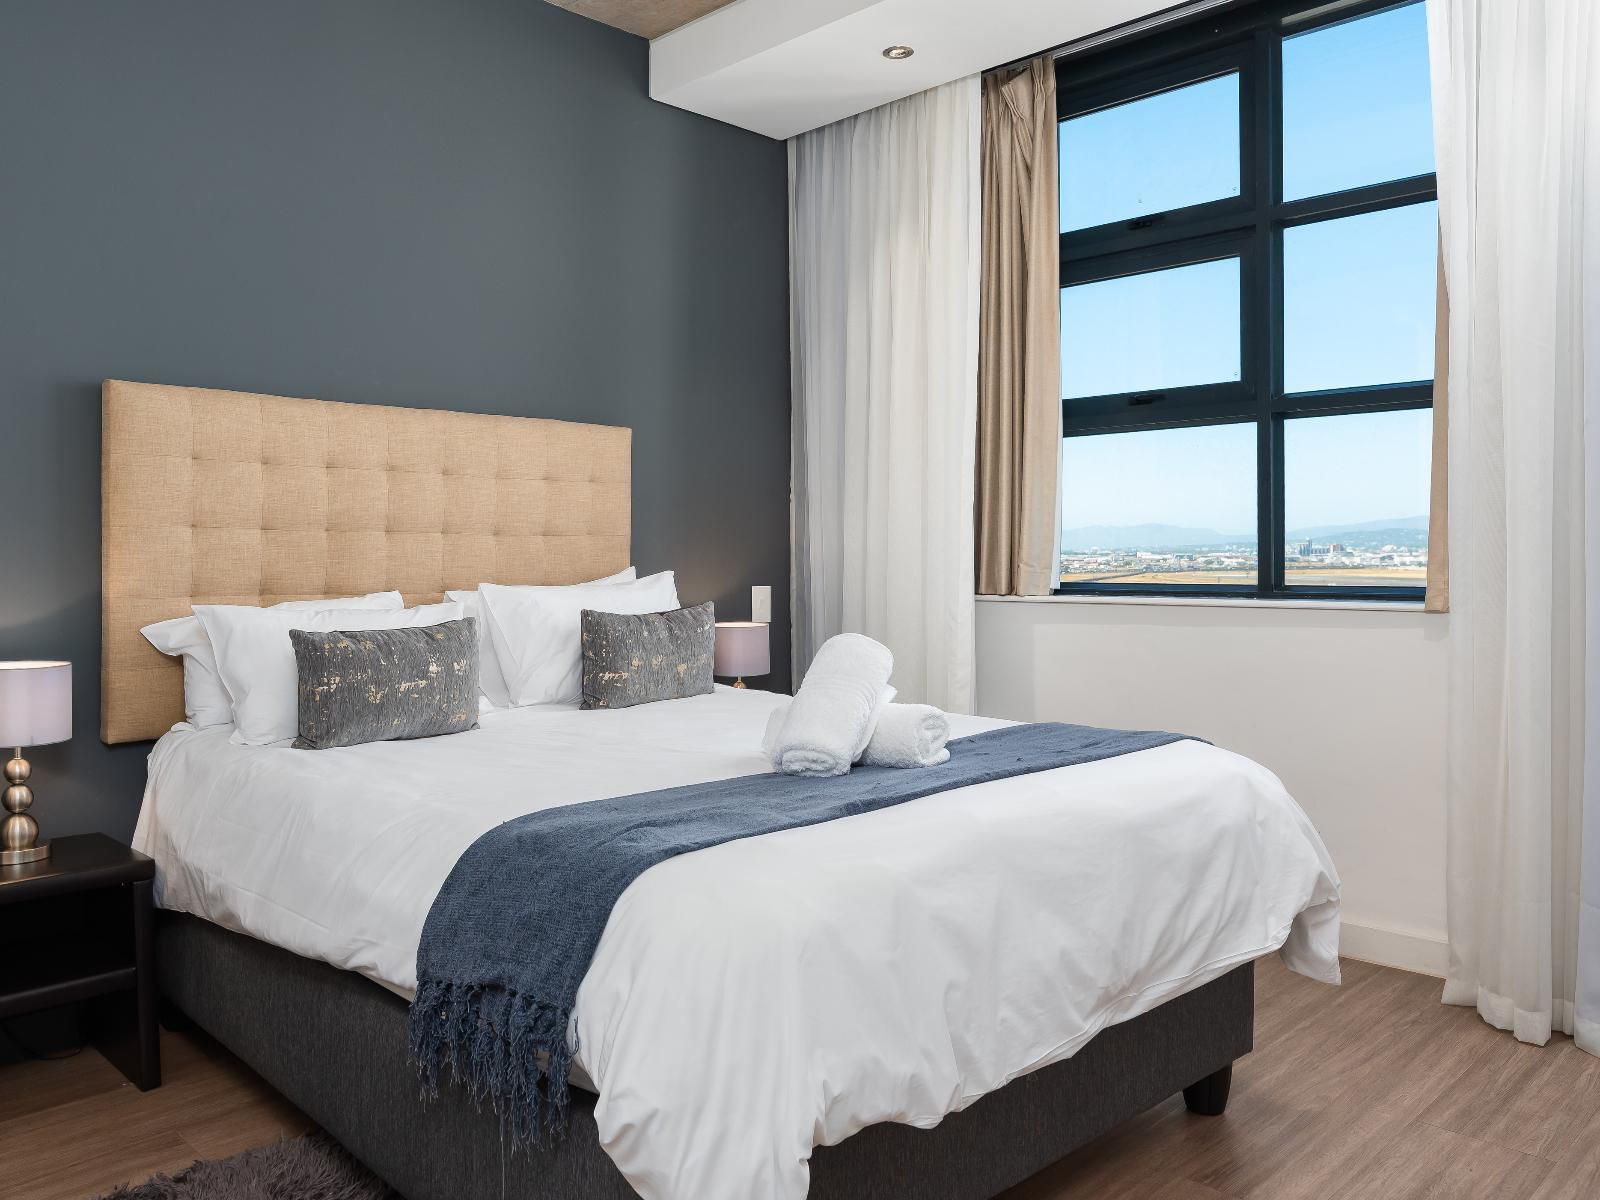 Home From Home Axis Apartments Century City Cape Town Western Cape South Africa Bedroom